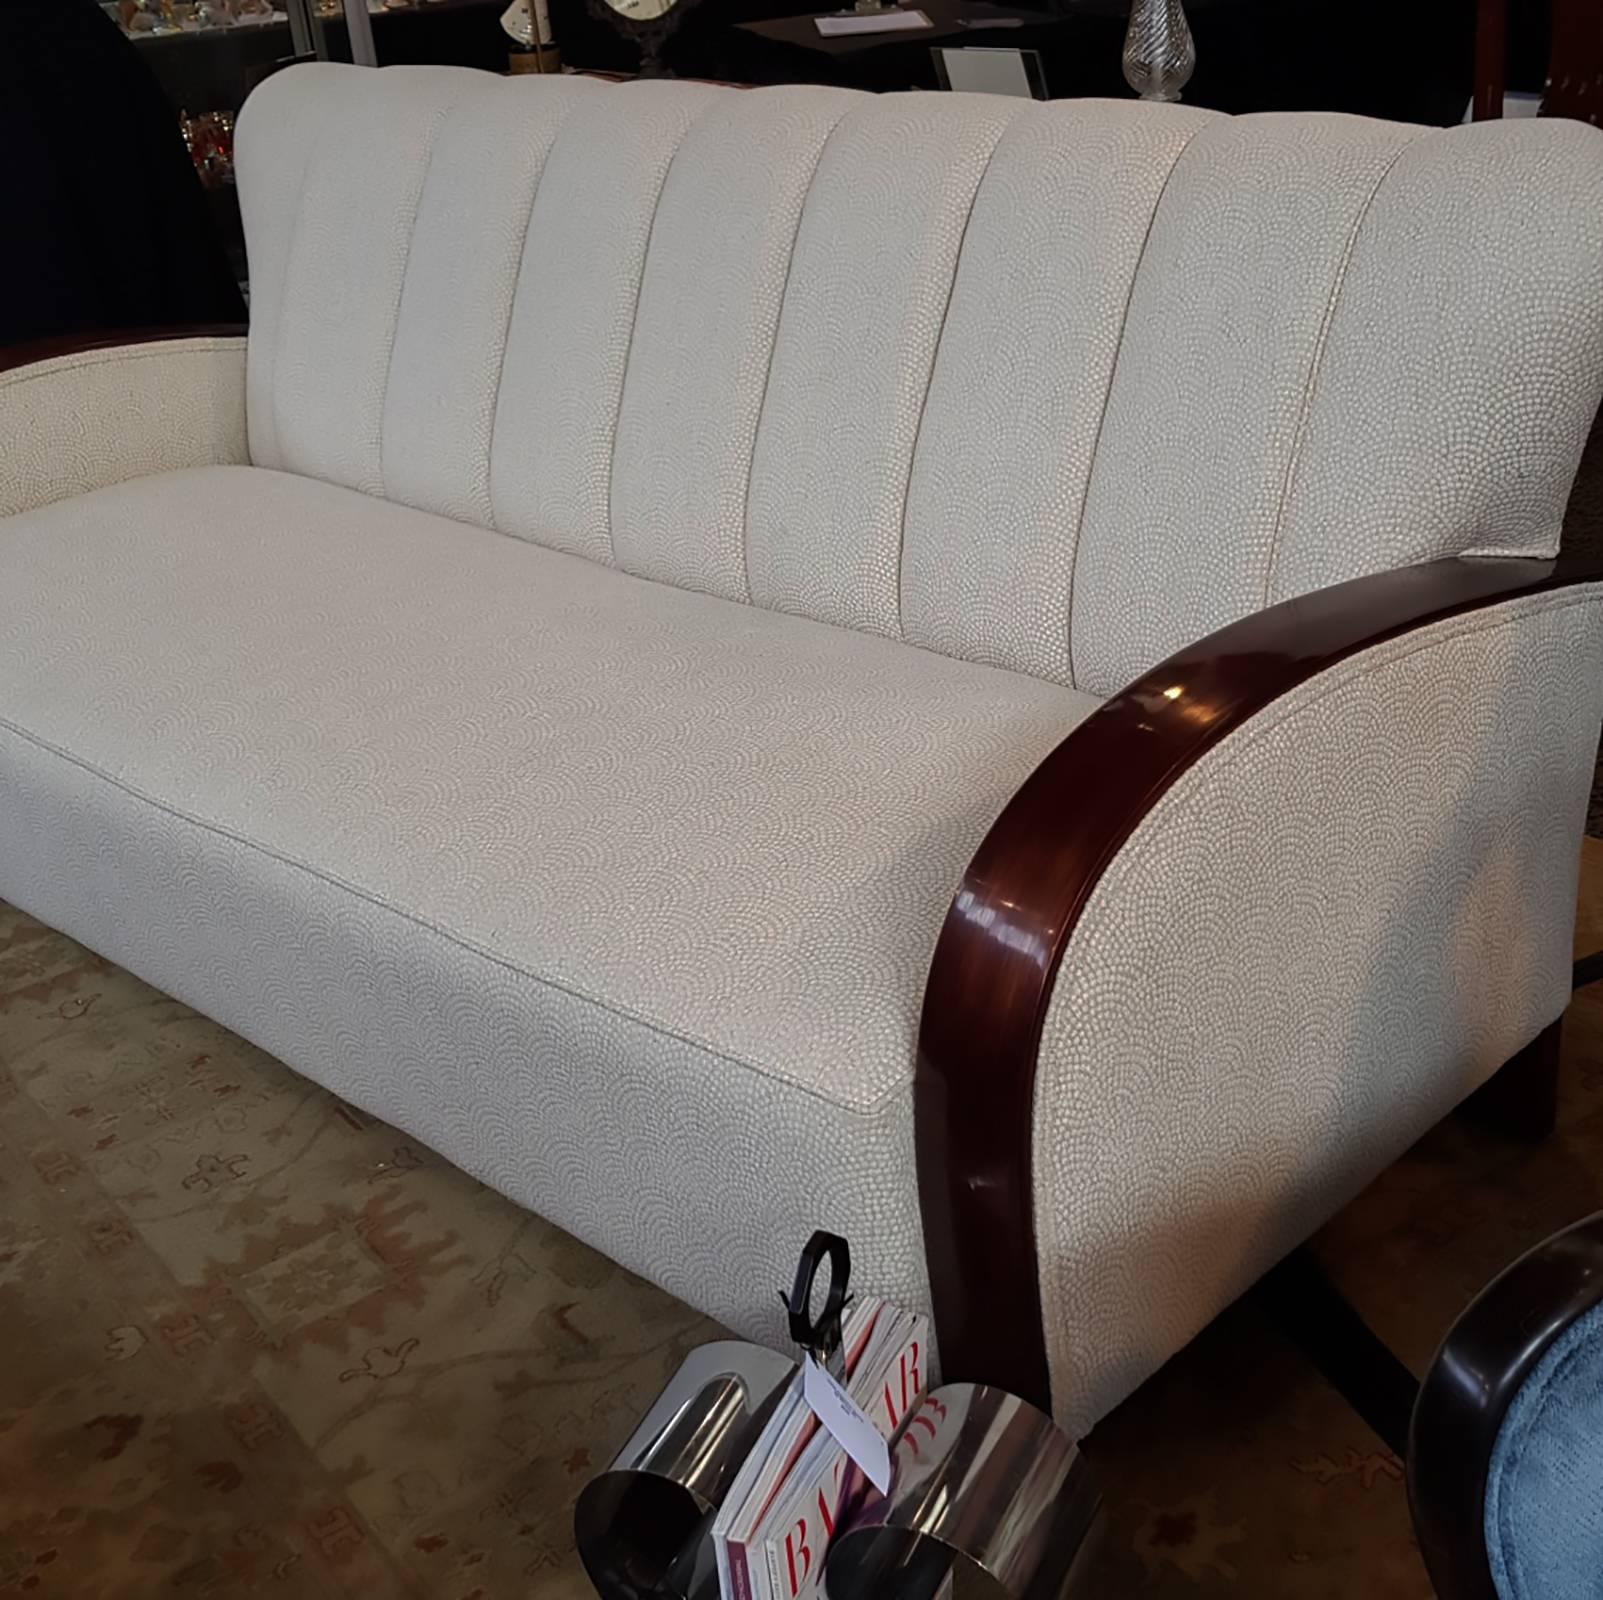 A spectacular Art Deco sofa with bent curved arms. In excellent condition being recently restored and reupholstered in a commercial quality ivory coloured fabric that has the Champagne pattern of expanding circles of “bubbles”, symmetrically aligned